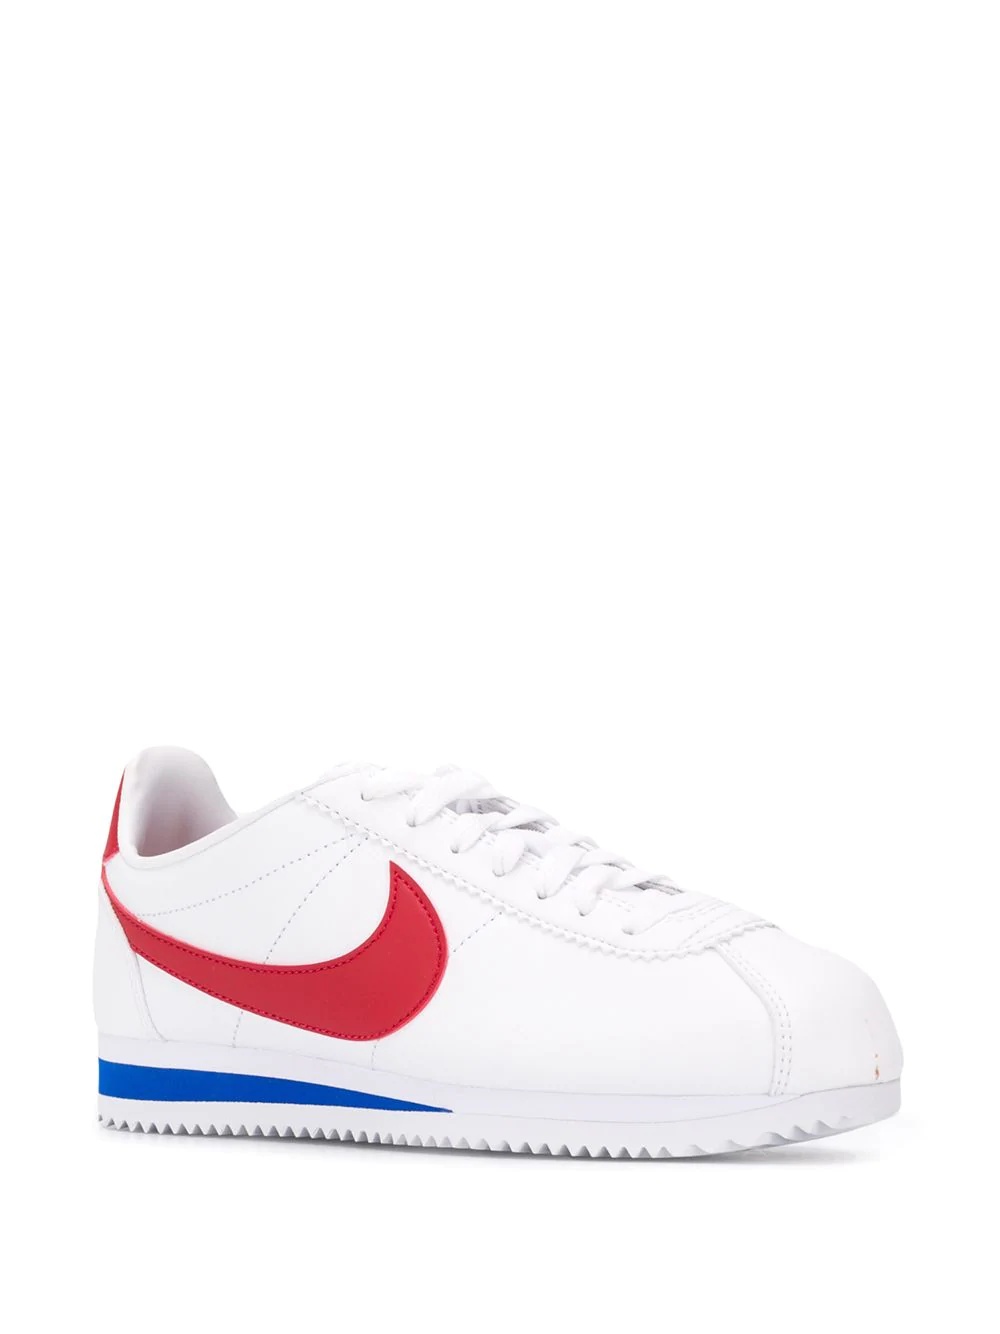 Classic Cortez "White/Varsity Red" leather sneakers - 2